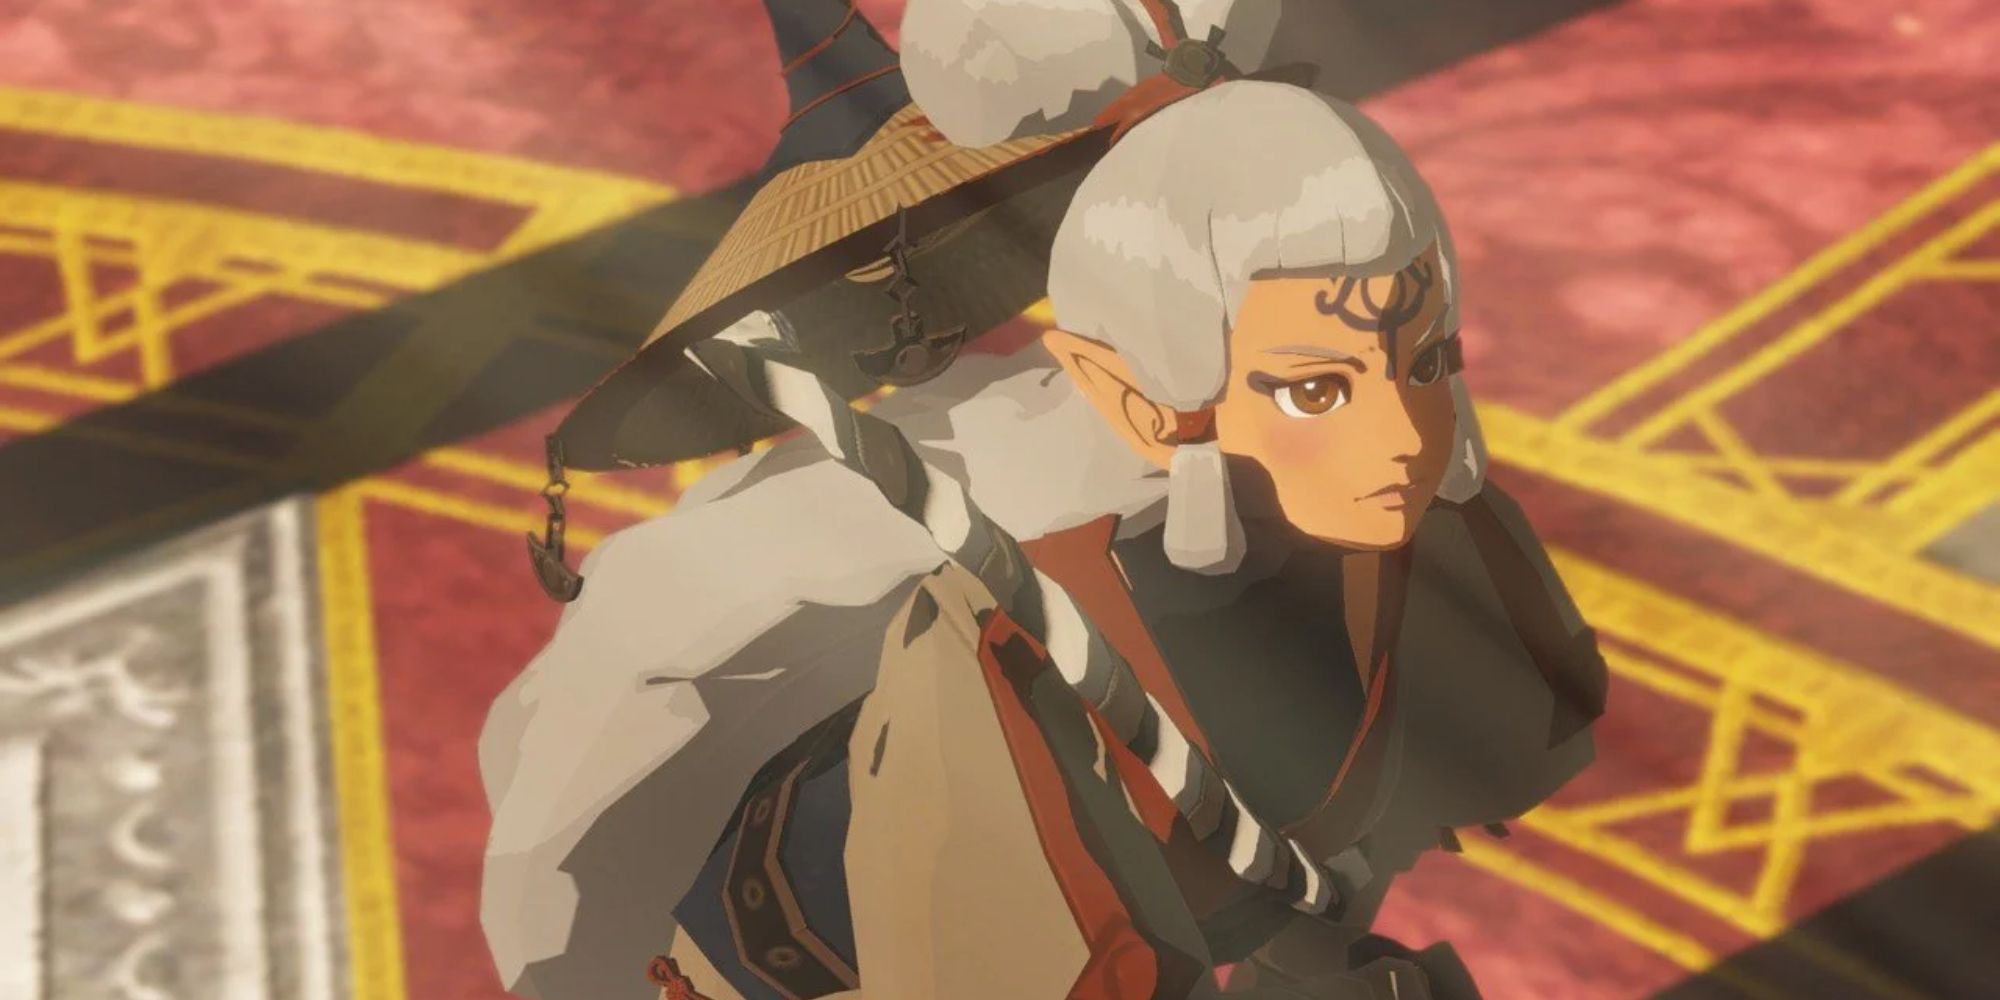 Impa kneels in the age of calamity